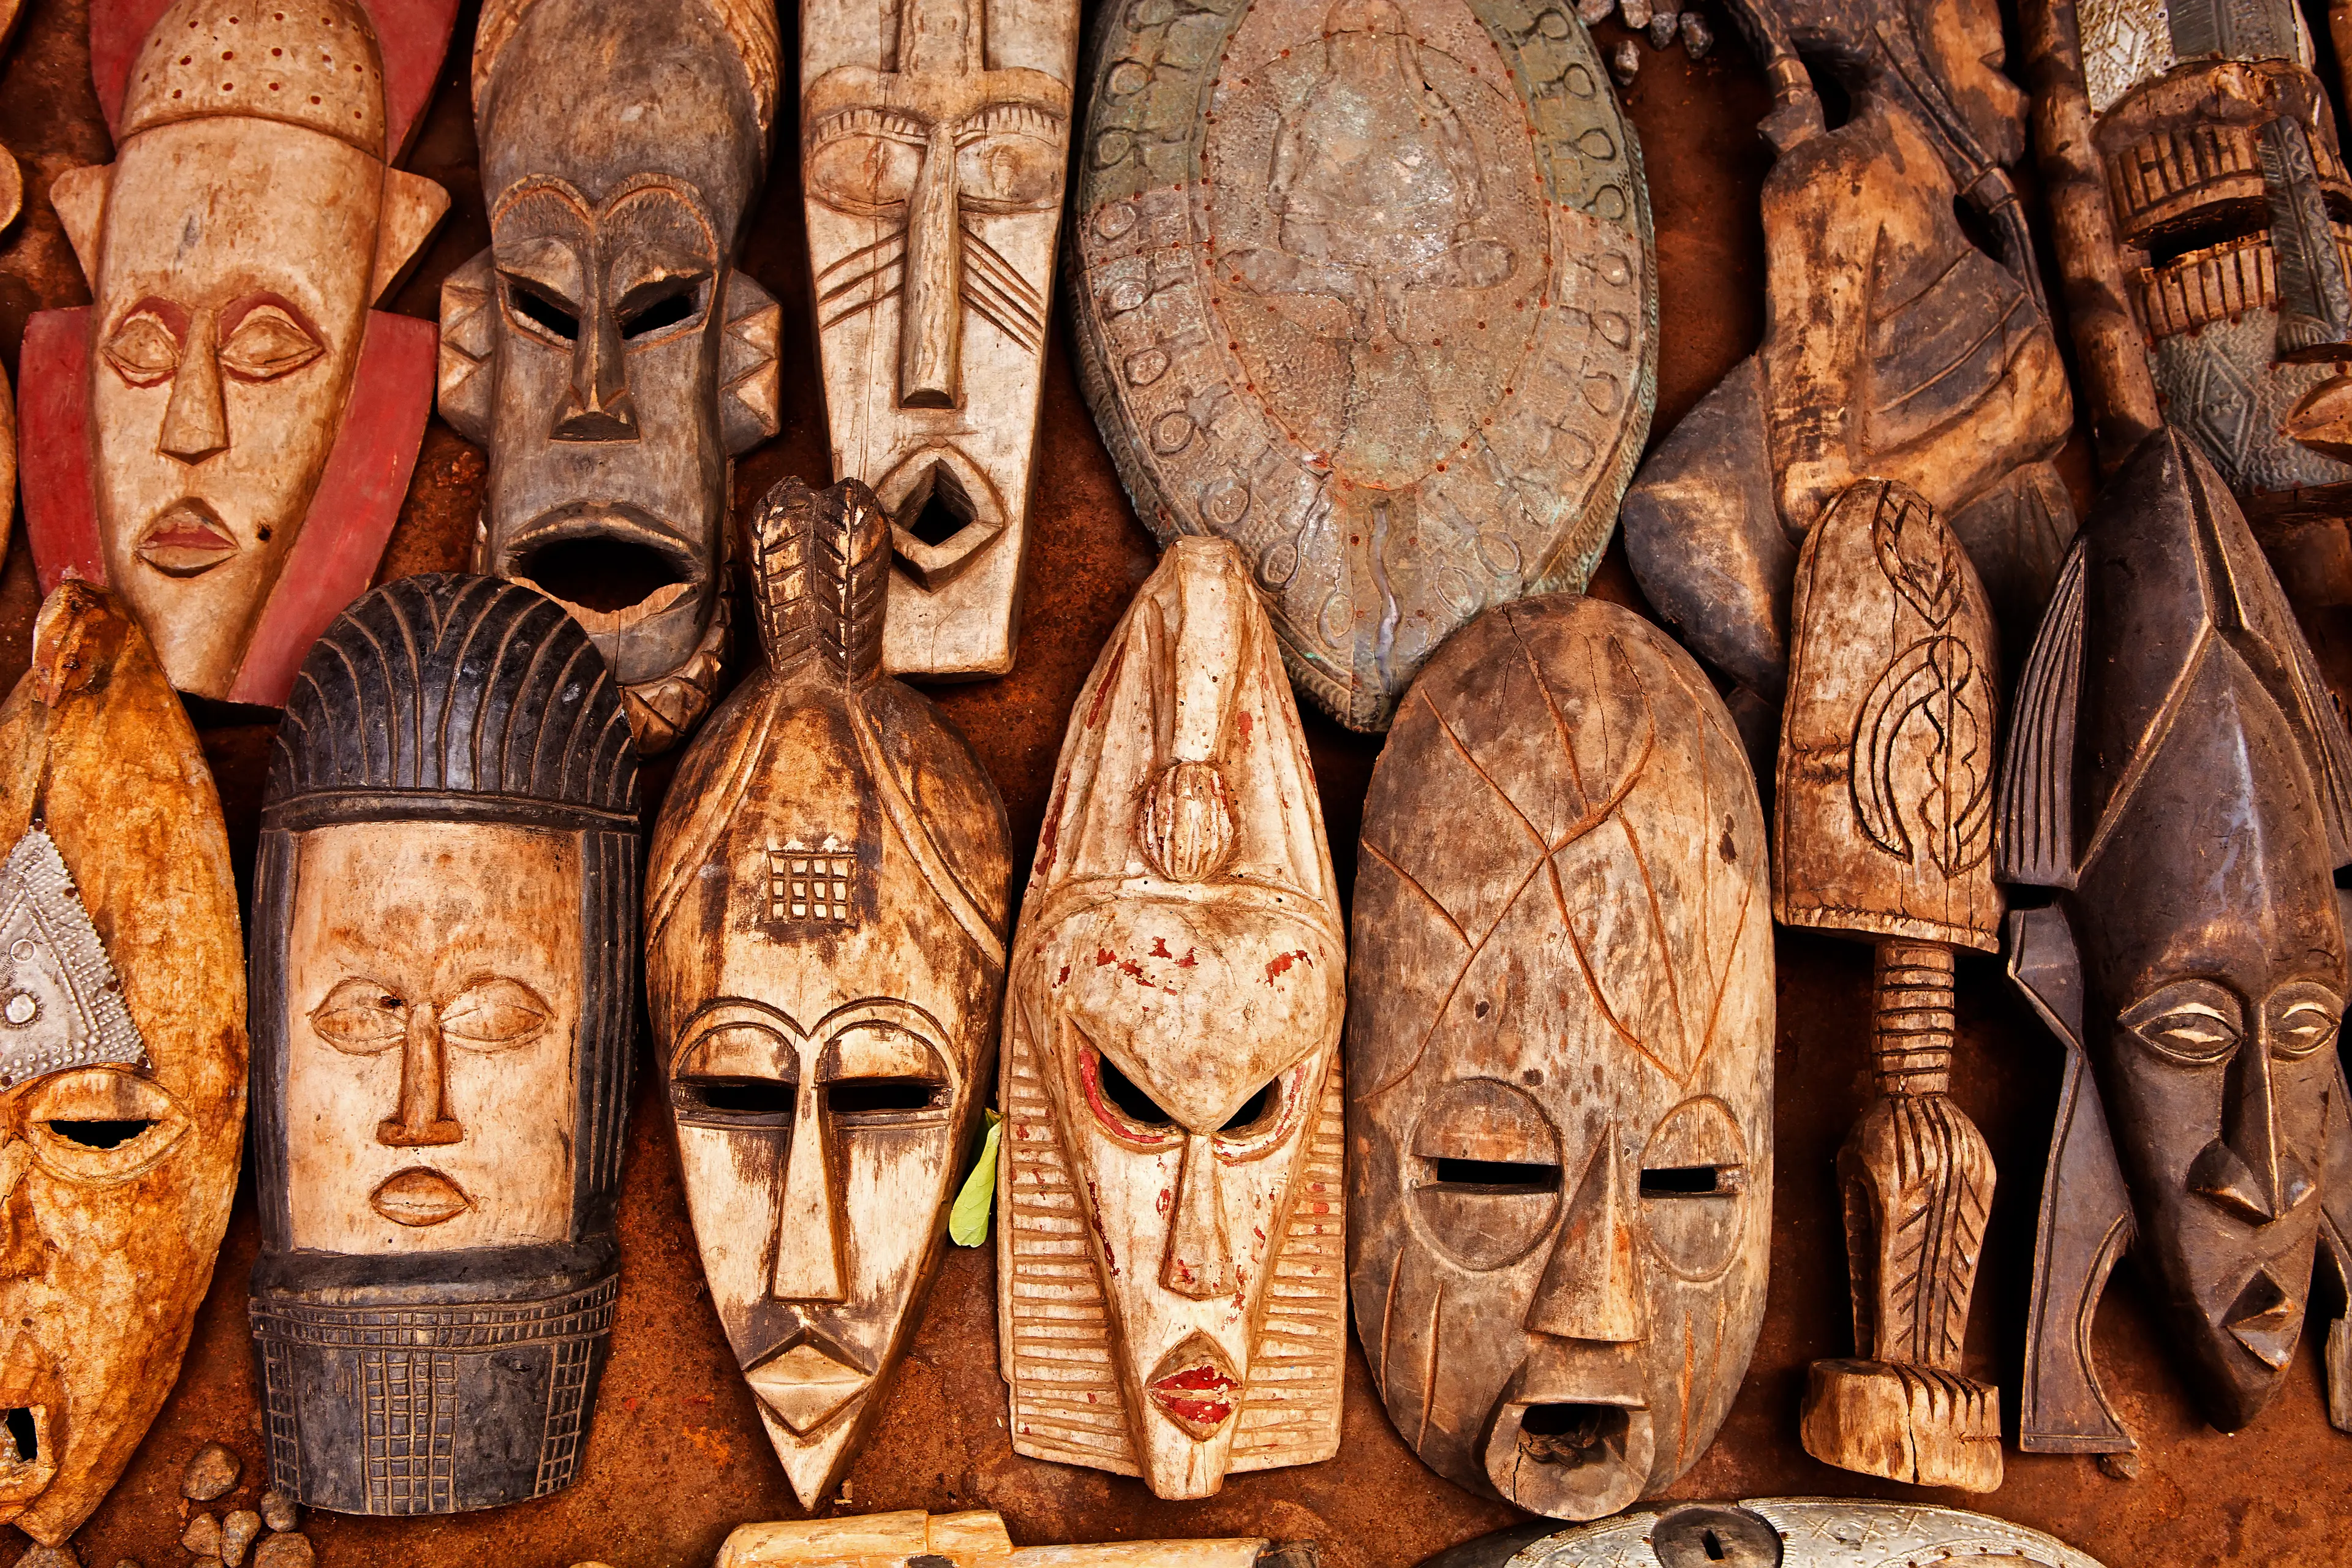 African art on display at an outdoor market